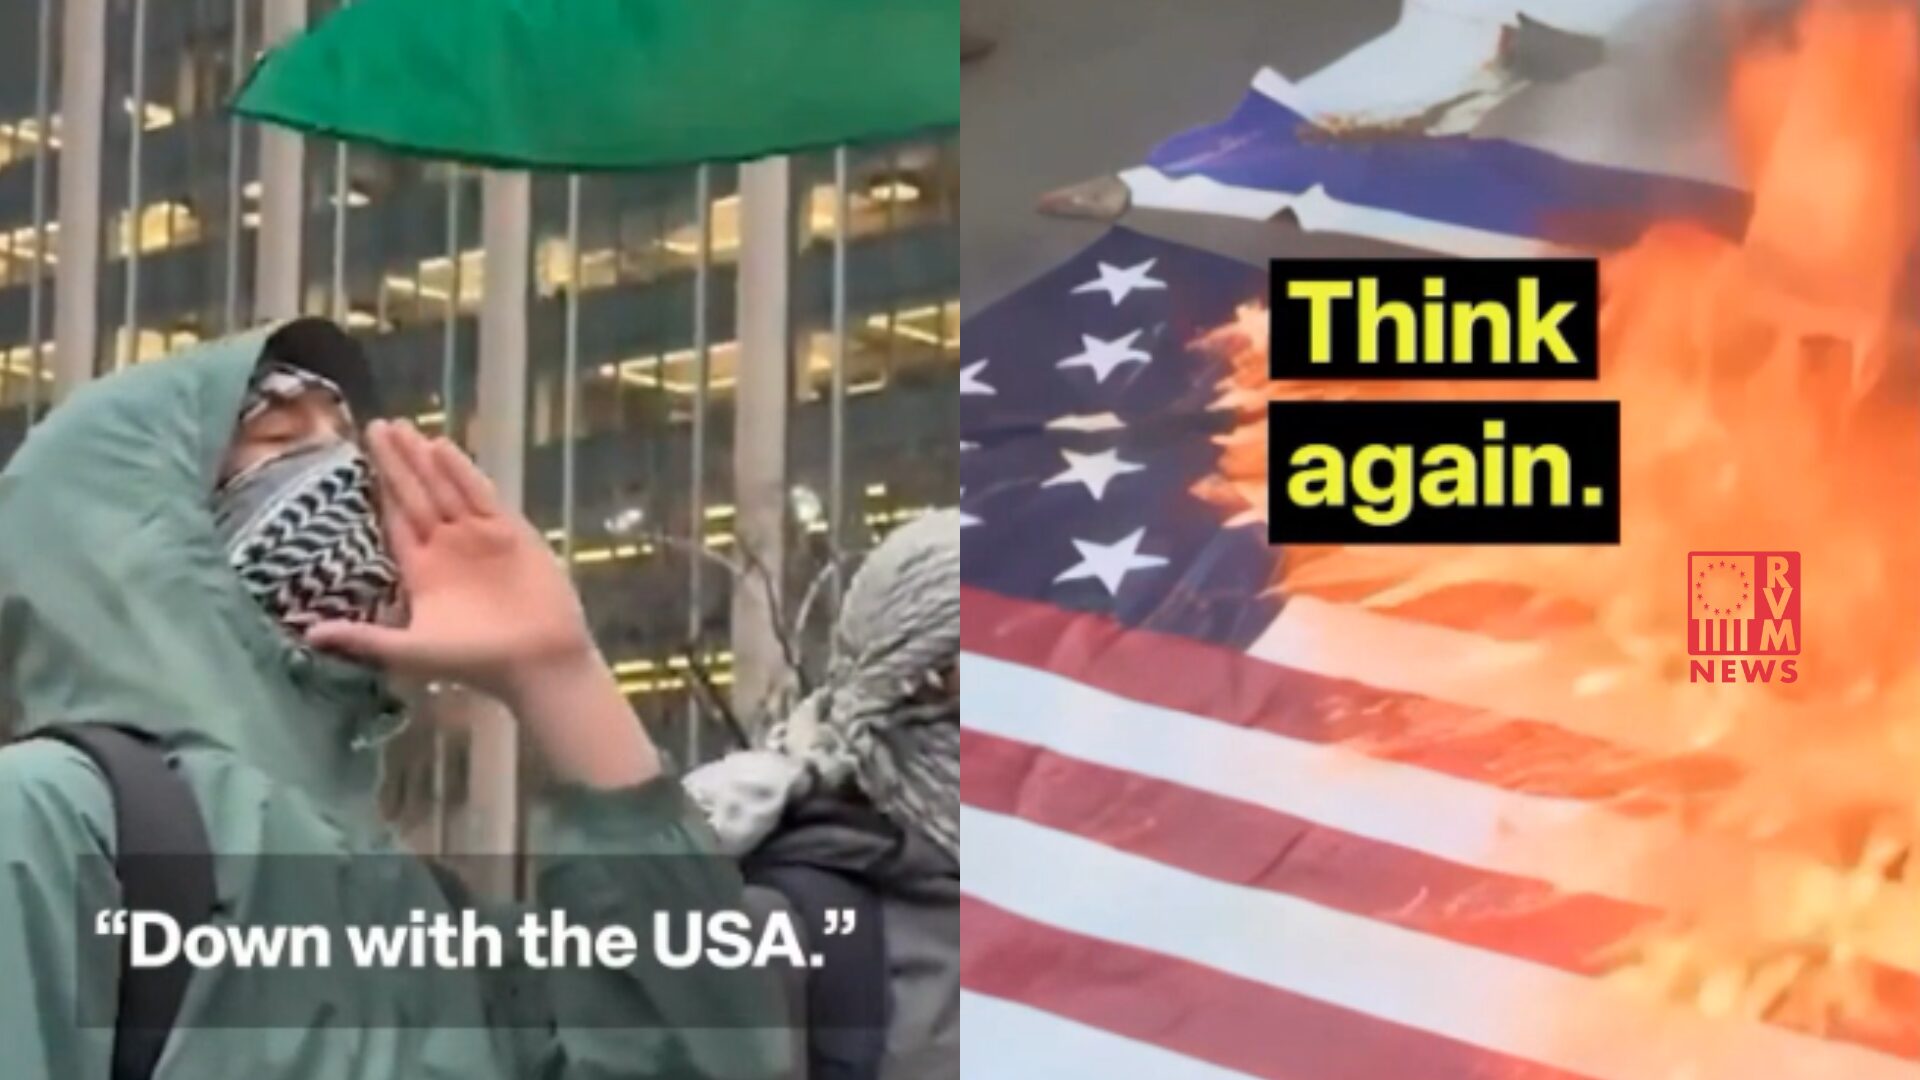 Hamas Wants to Unite Our Enemies to Wipe out the USA and They Are Here on American Soil [VIDEO]